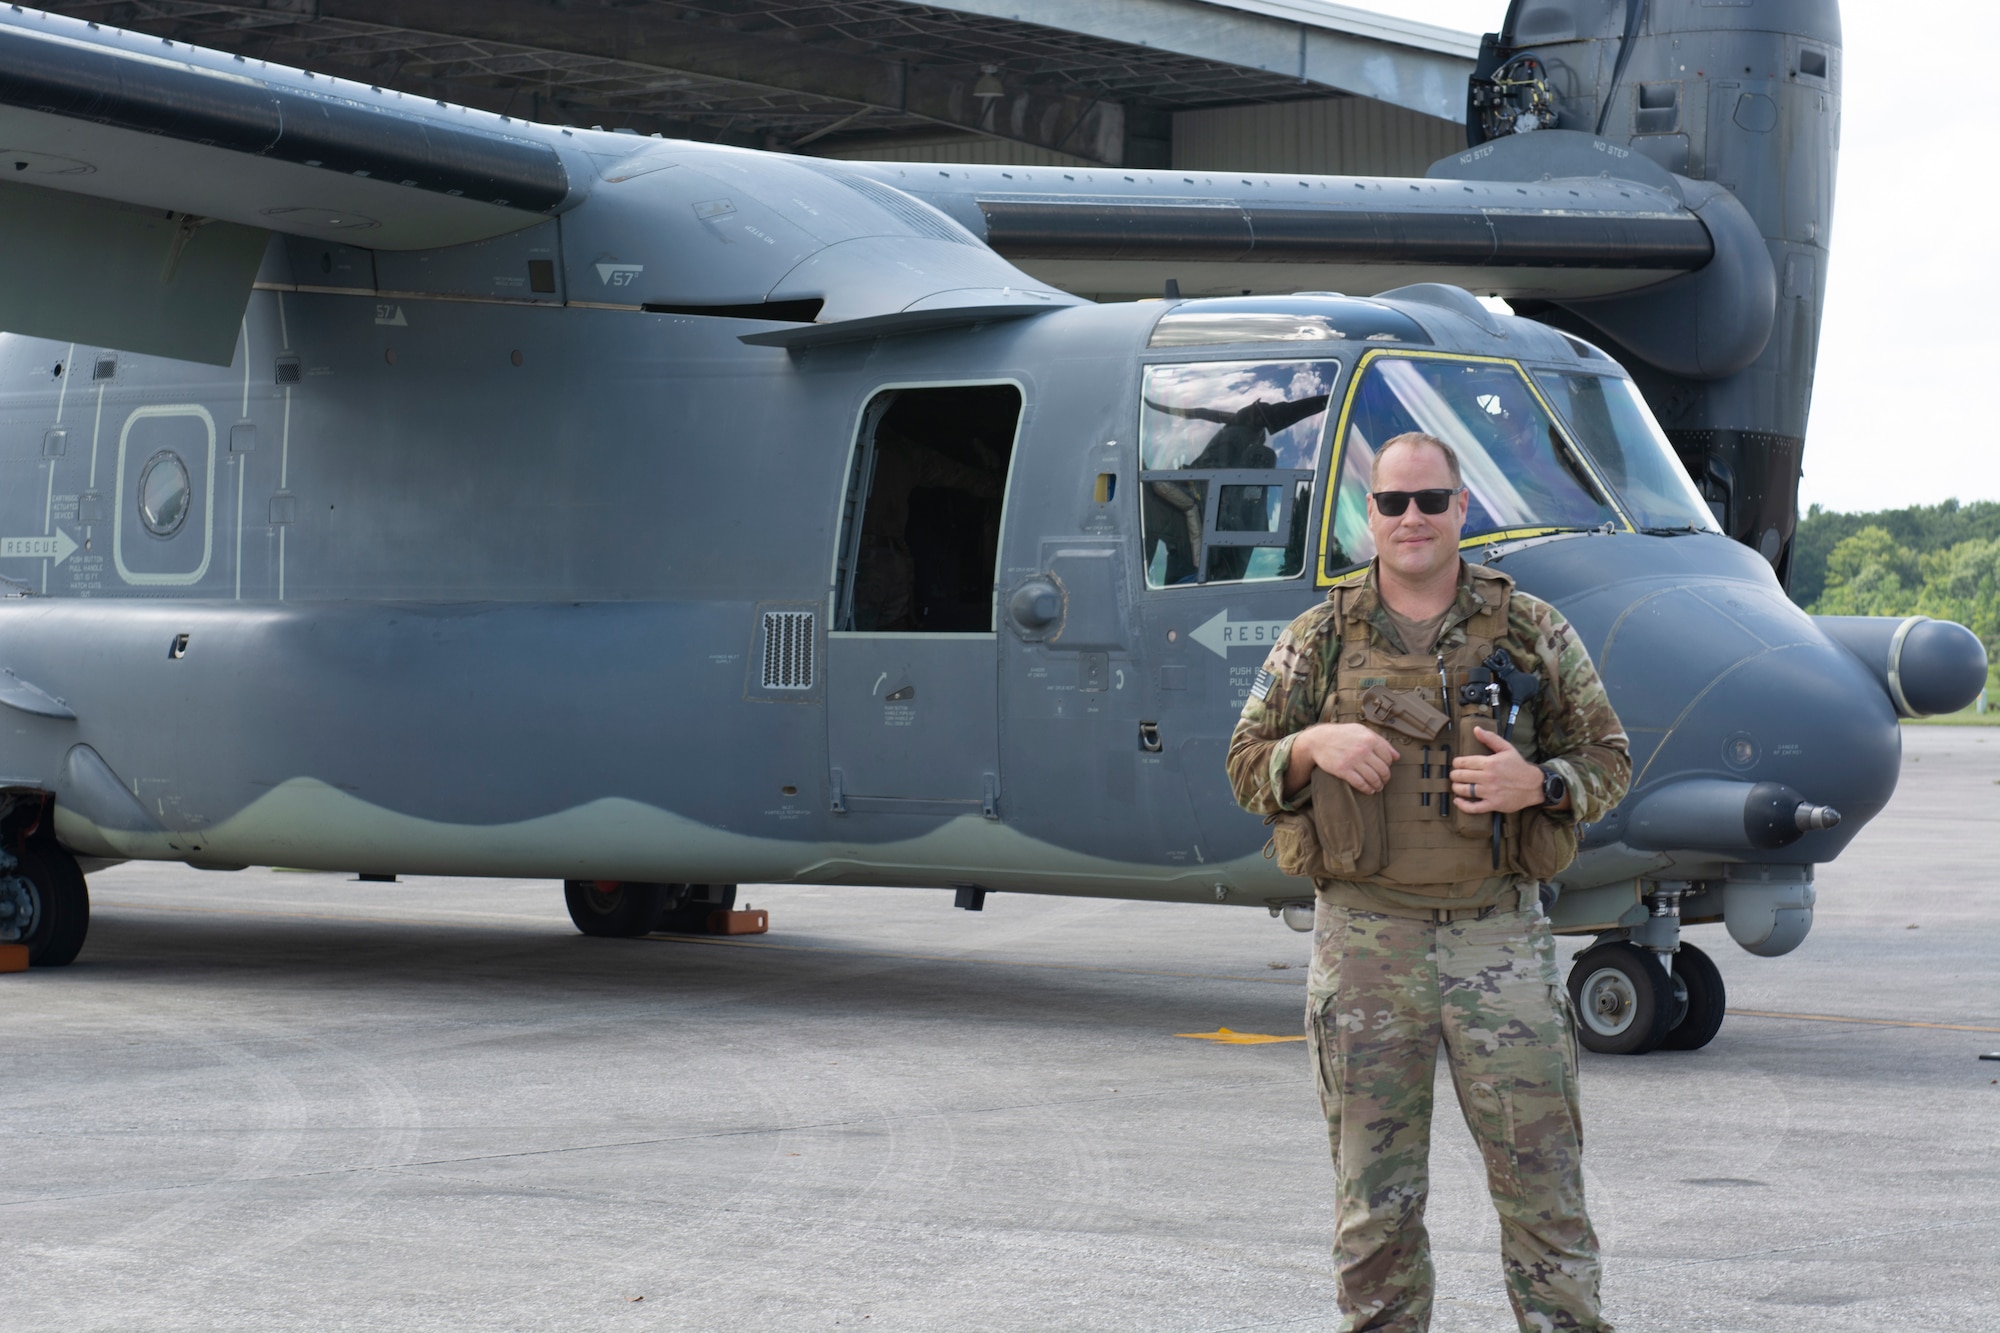 Florida Air National Guard Lt. Col. Luke Sustman is the first Air Force pilot to log 3,000 flight hours in the CV-22 Osprey. He achieved the milestone Aug. 13, 2020, flying from Hurlburt Field east of Pensacola to the Jacksonville Air National Guard Base, where he is shown.